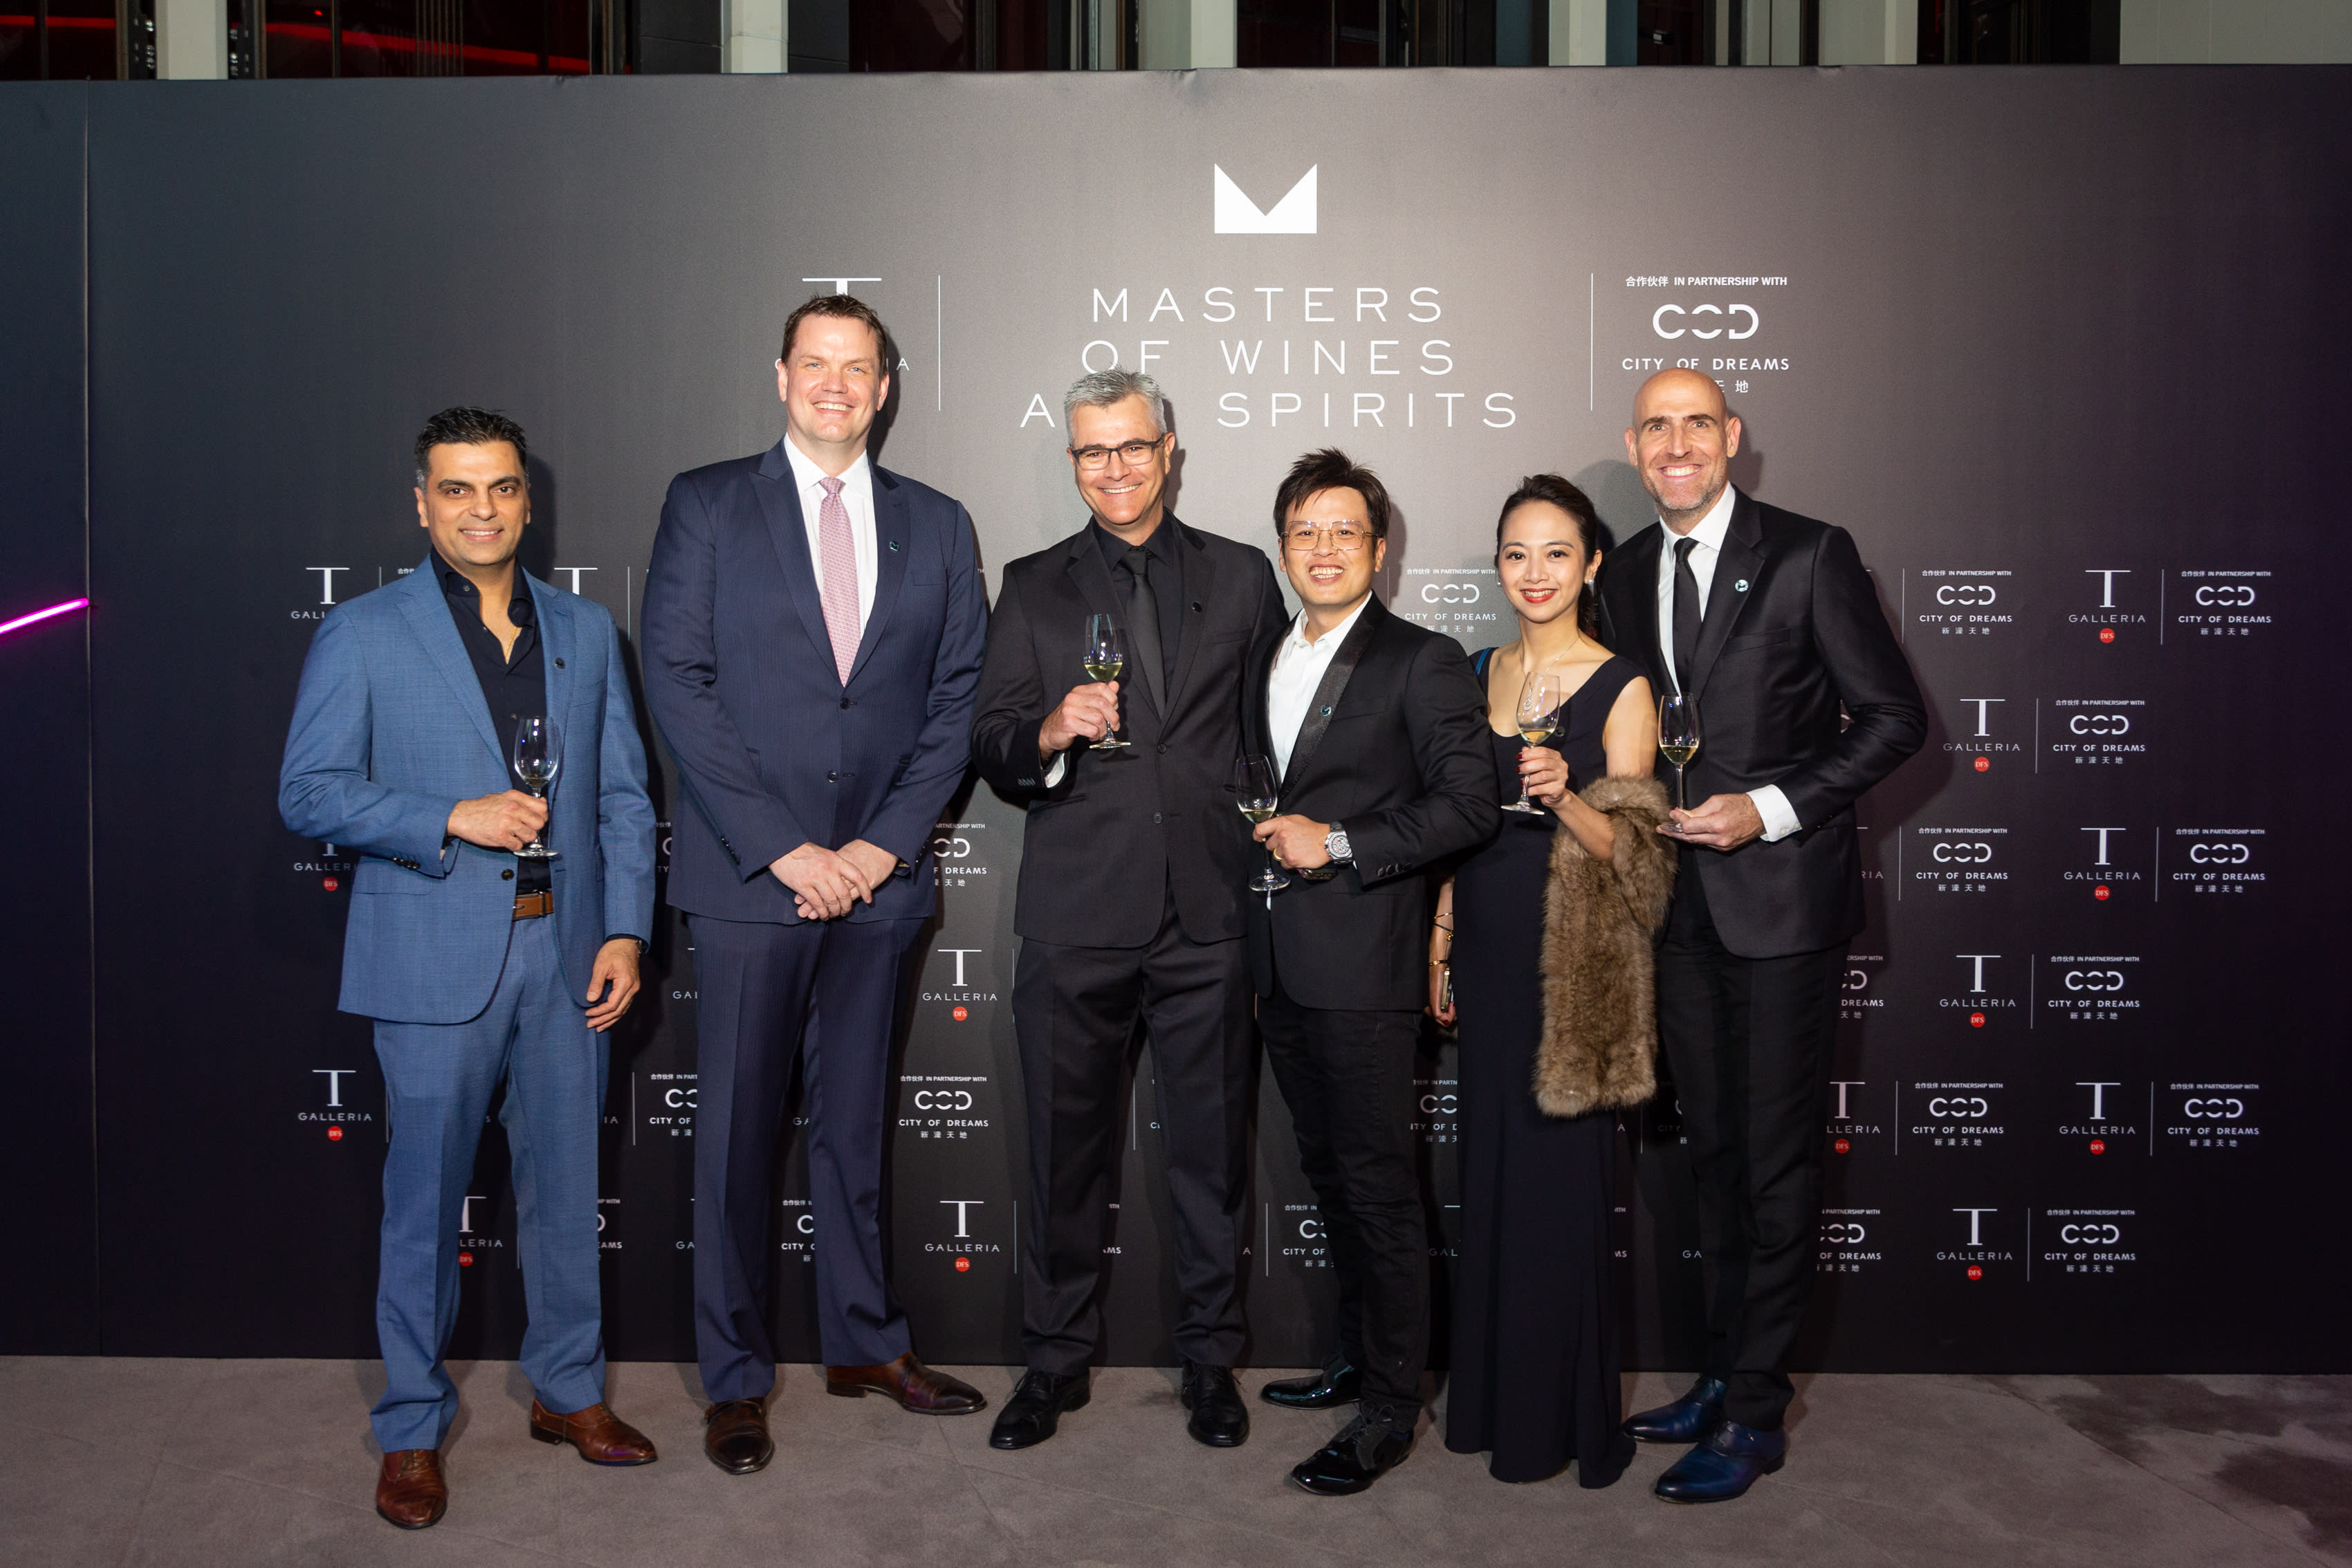 DFS raises luxury bar with opening of 'T Galleria' in Hong Kong